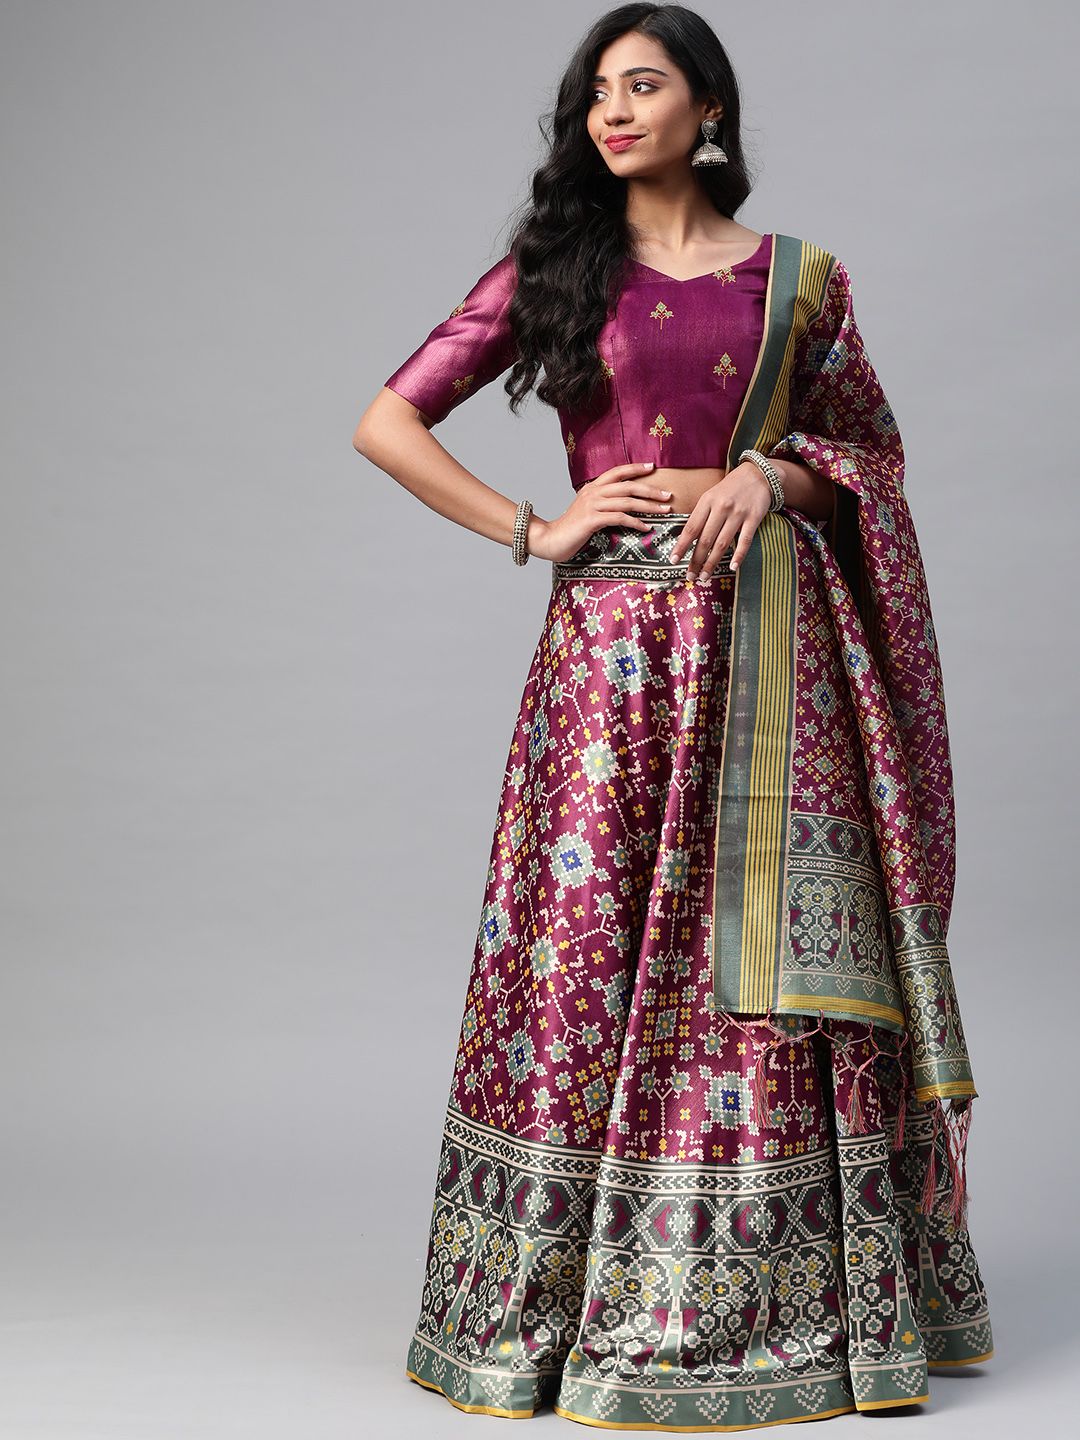 SHUBHVASTRA Burgundy Printed Semi-Stitched Lehenga & Unstitched Blouse With Dupatta Price in India